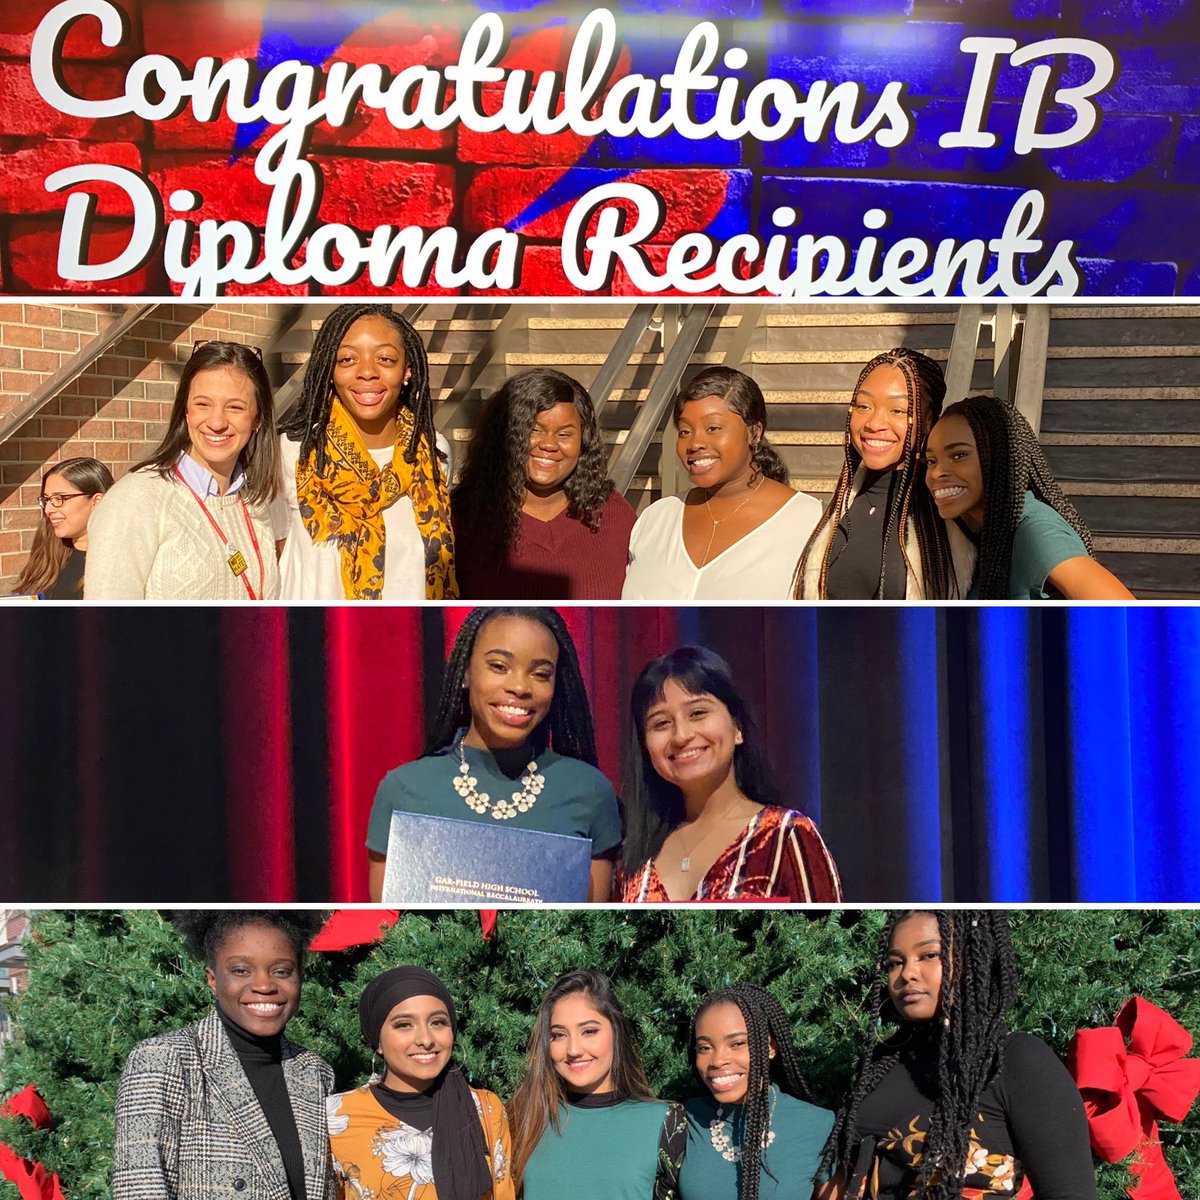 Had the opportunity to visit @Gar_Field_HS to celebrate with my daughter @amarixmtchll as she received her IB Diploma. Thank you @Jehovanni17 for such a blessing. So proud to see so many former @Bel_Air_ES students with their diplomas. #dadsasprincipals #proudprincipal